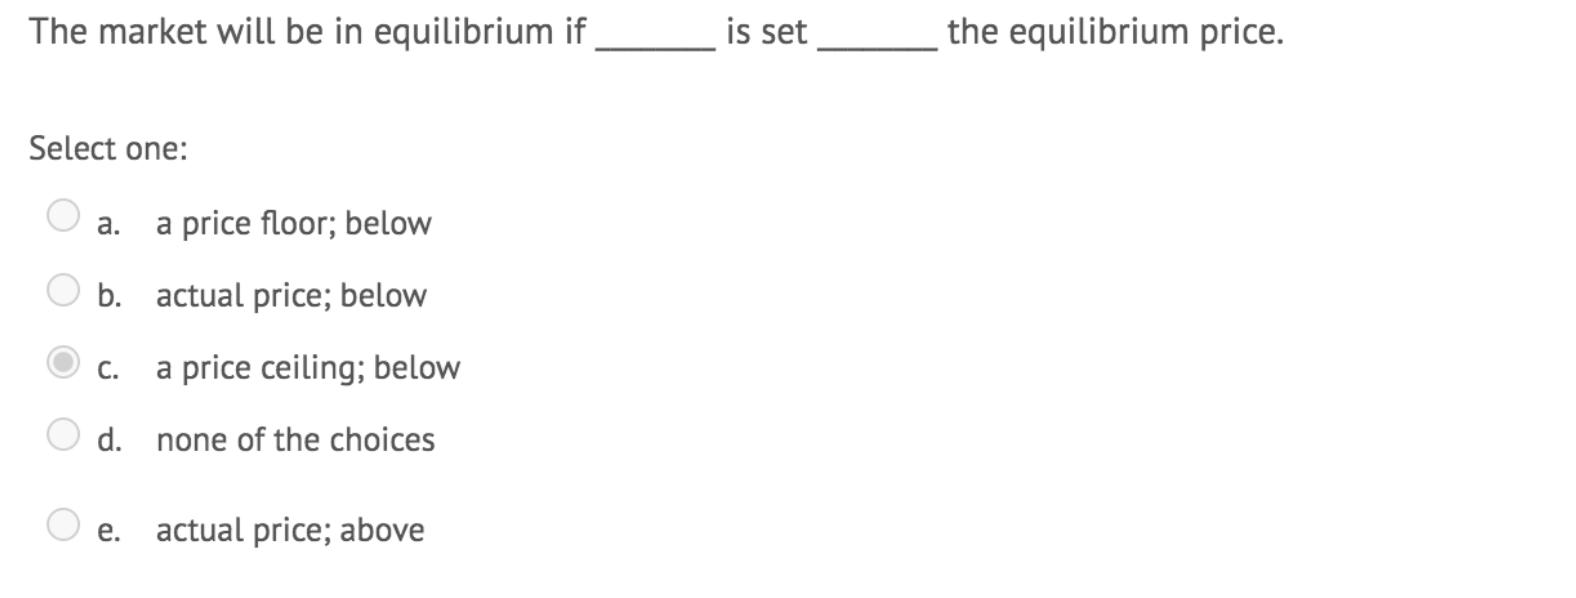 The market will be in equilibrium if is set the equilibrium price. Select one: a. a price floor; below b. actual price; below